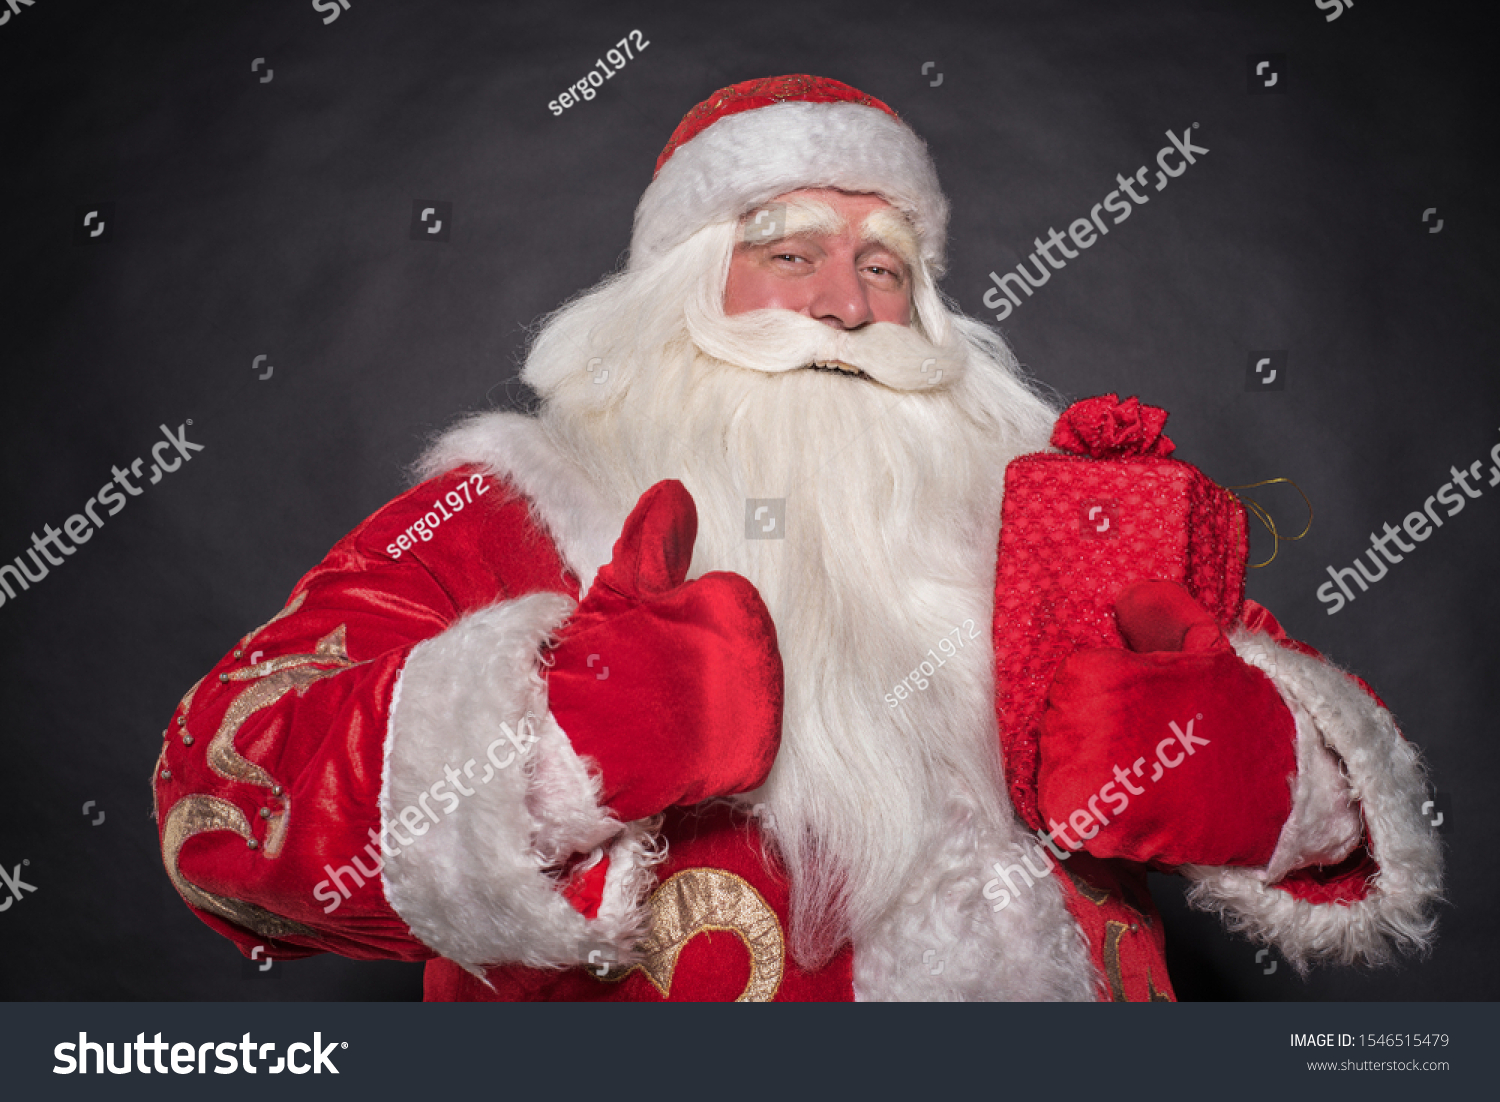 Santa Claus on a black background. The majestic and fabulous portrait of Santa Claus on a black background, who carefully and cunningly looks, smiles and laughs cheerfully and laughs. #1546515479